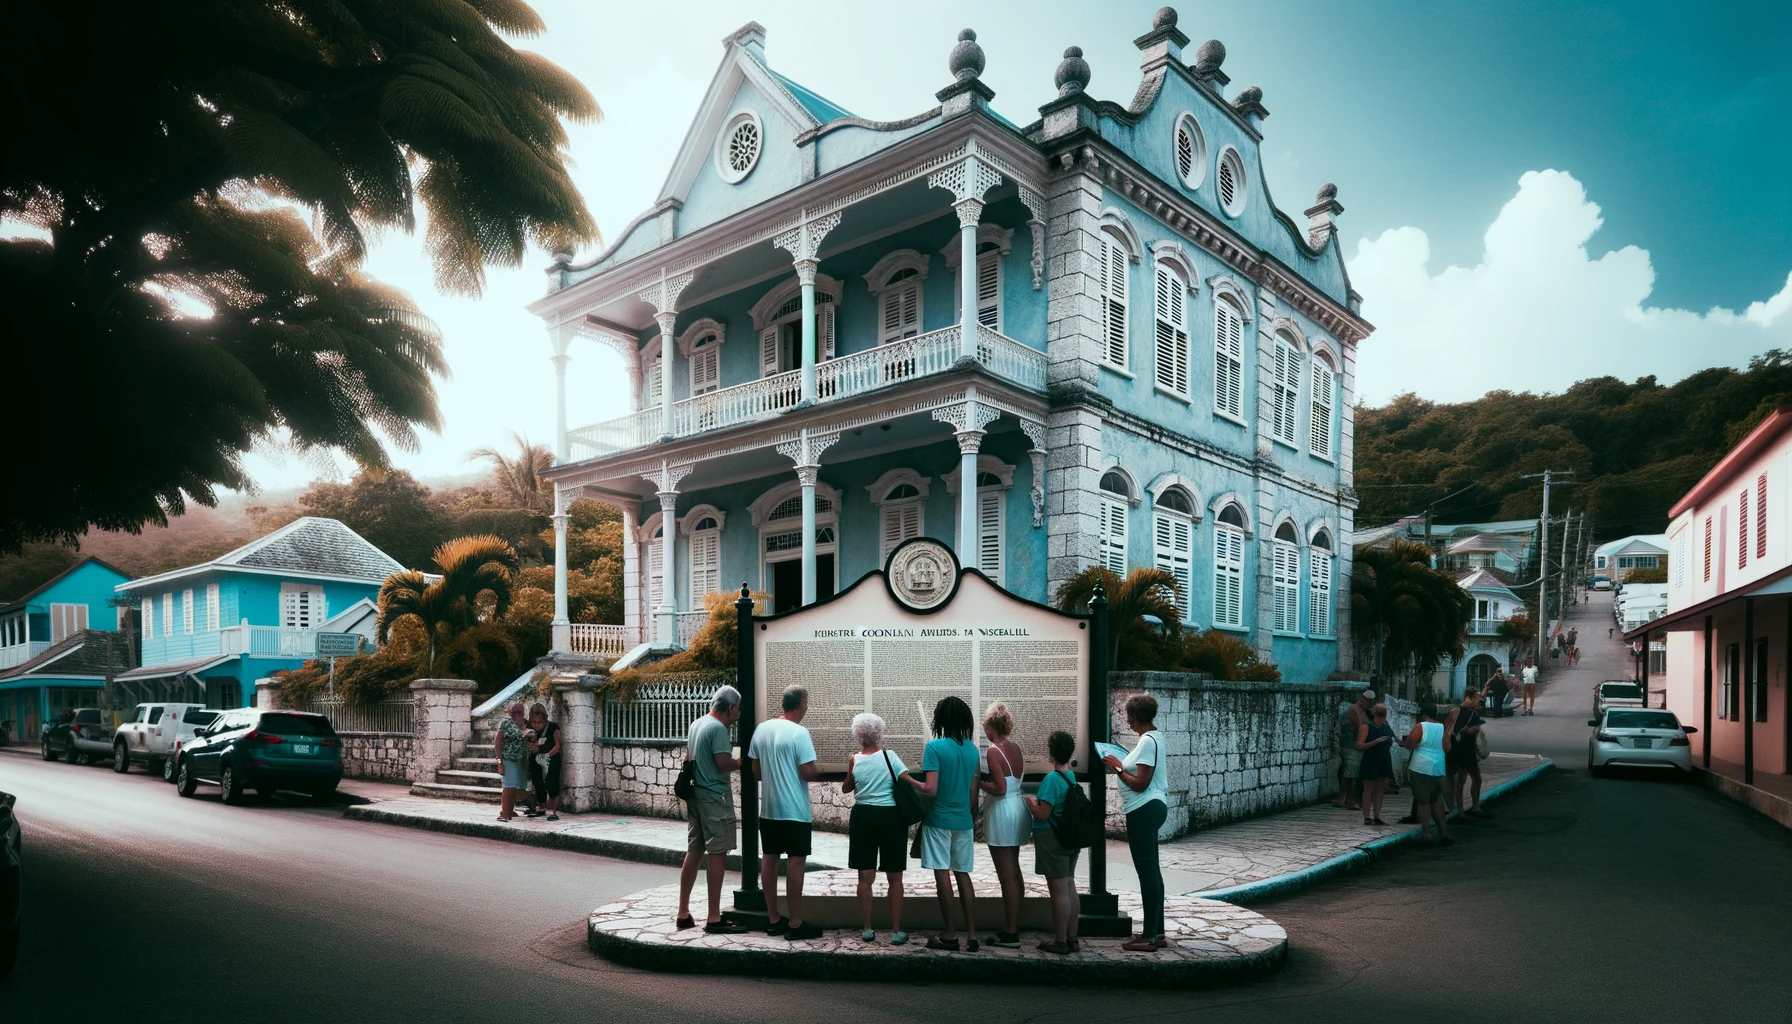 A History Buff’s Guide to Negril: Heritage and Landmarks